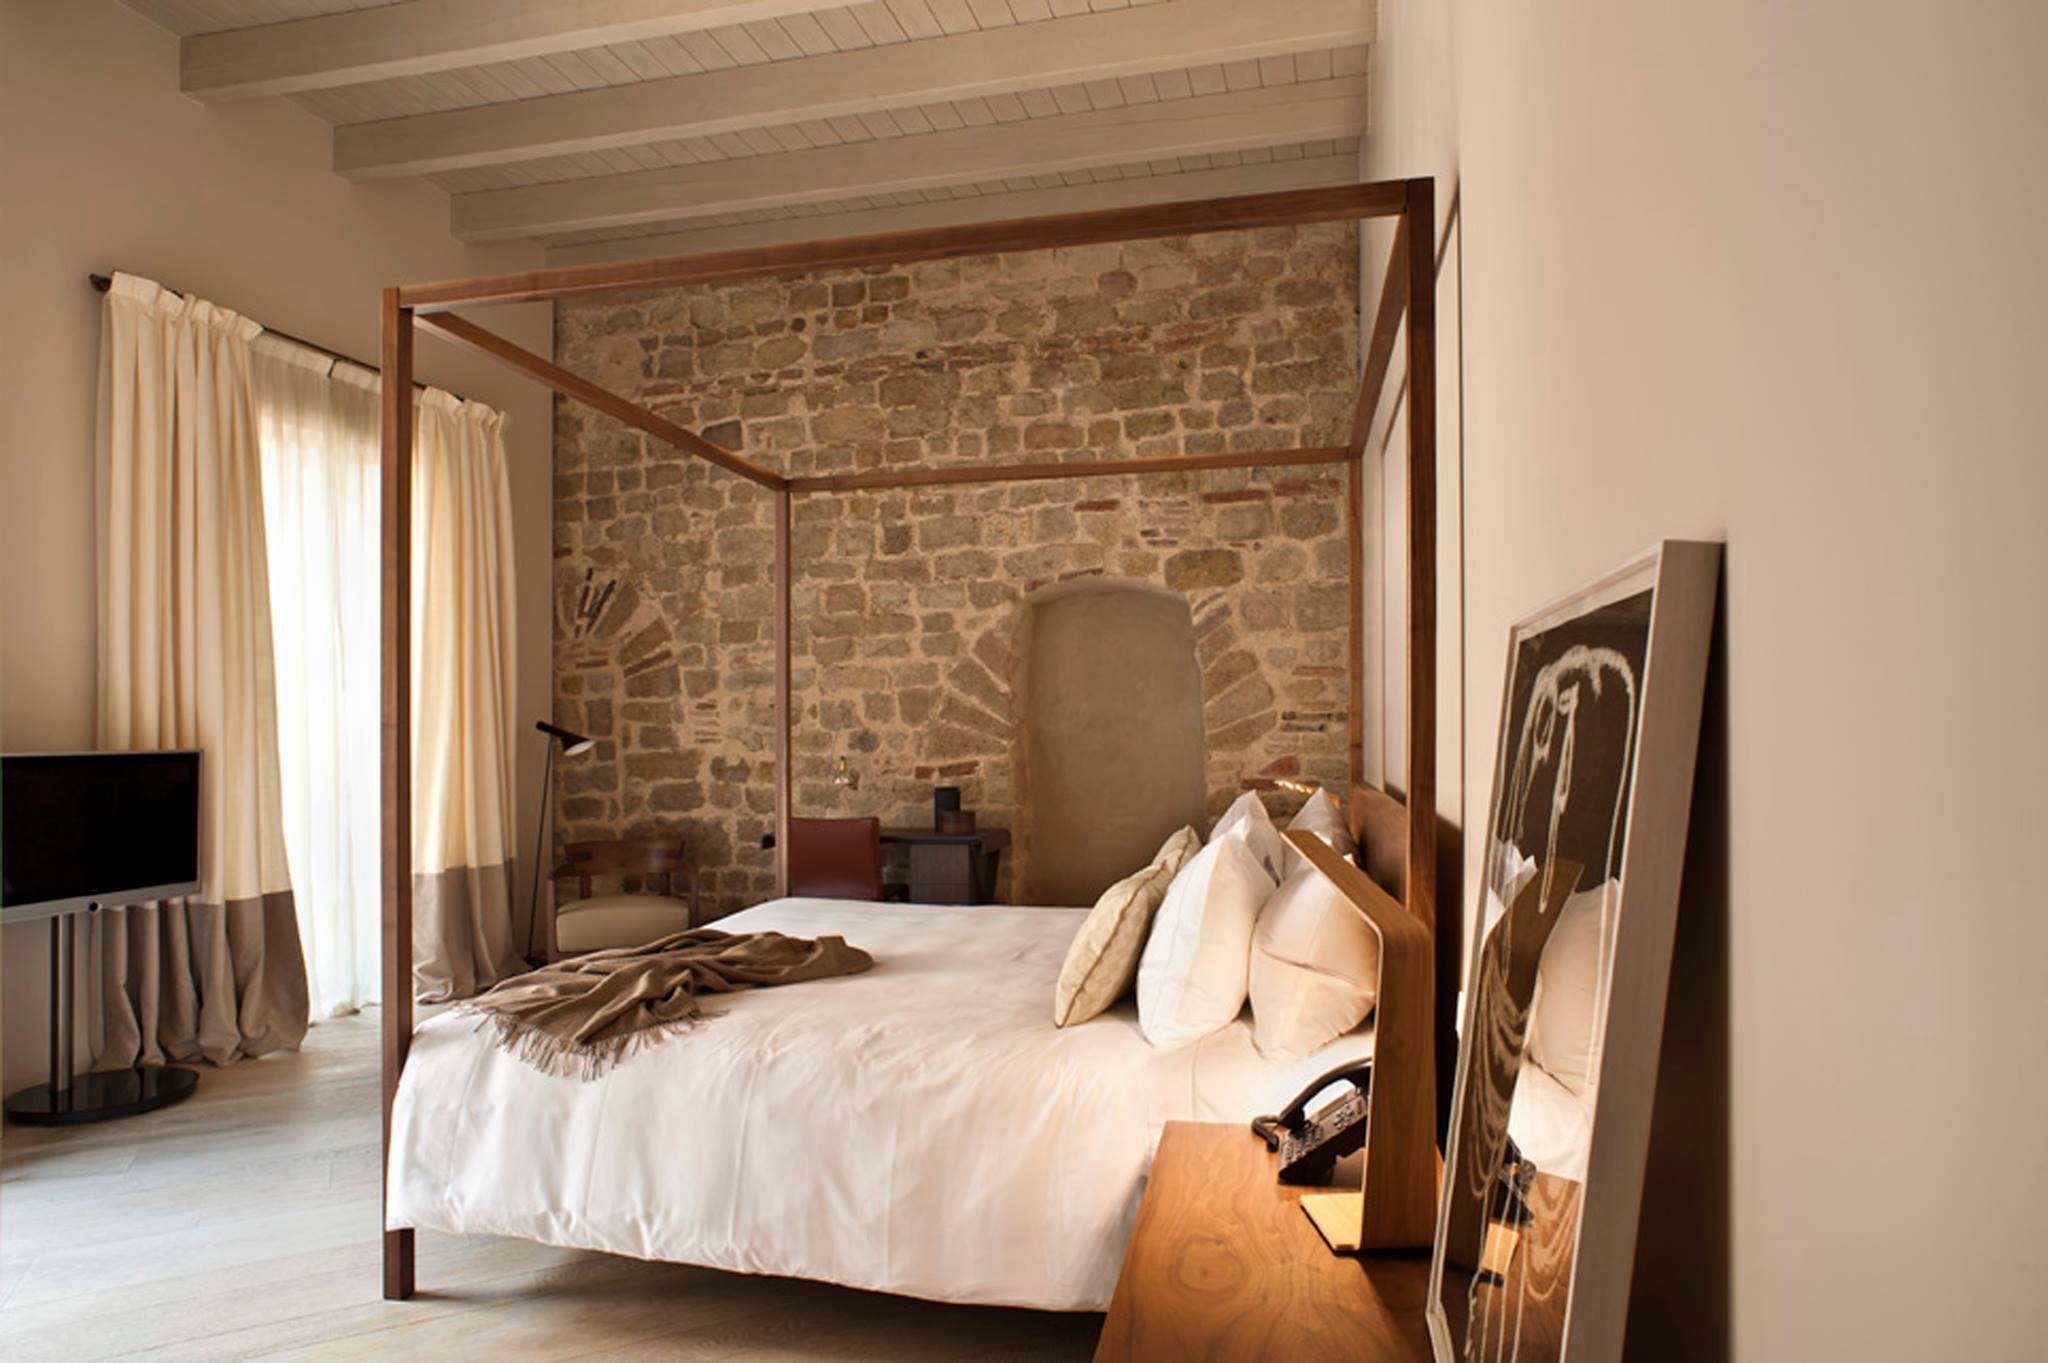 Mercer Hotel's historic rooms with old walls form one of the bedrooms of this boutique htoels in Barcelona bedroom